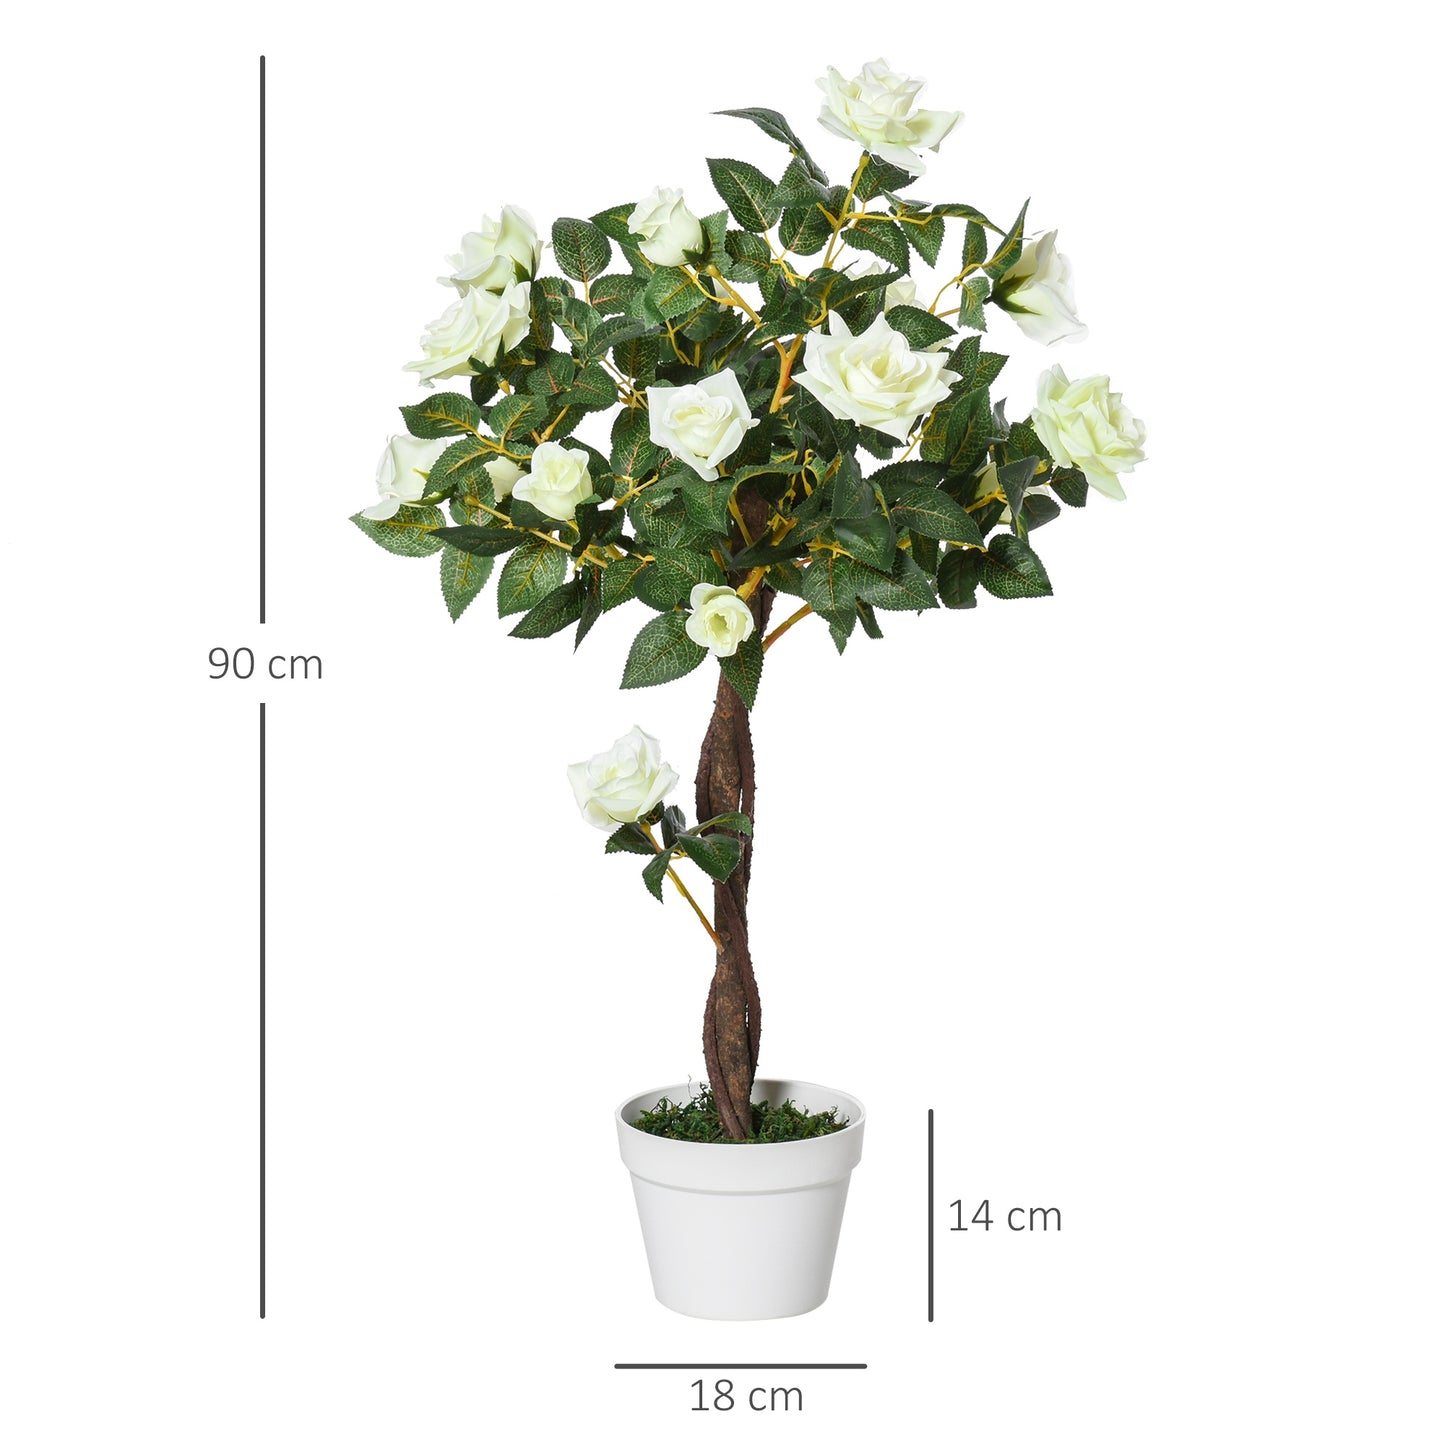 Outsunny Artificial Camellia Plant Realistic Fake Tree Potted Home Office 90cm White